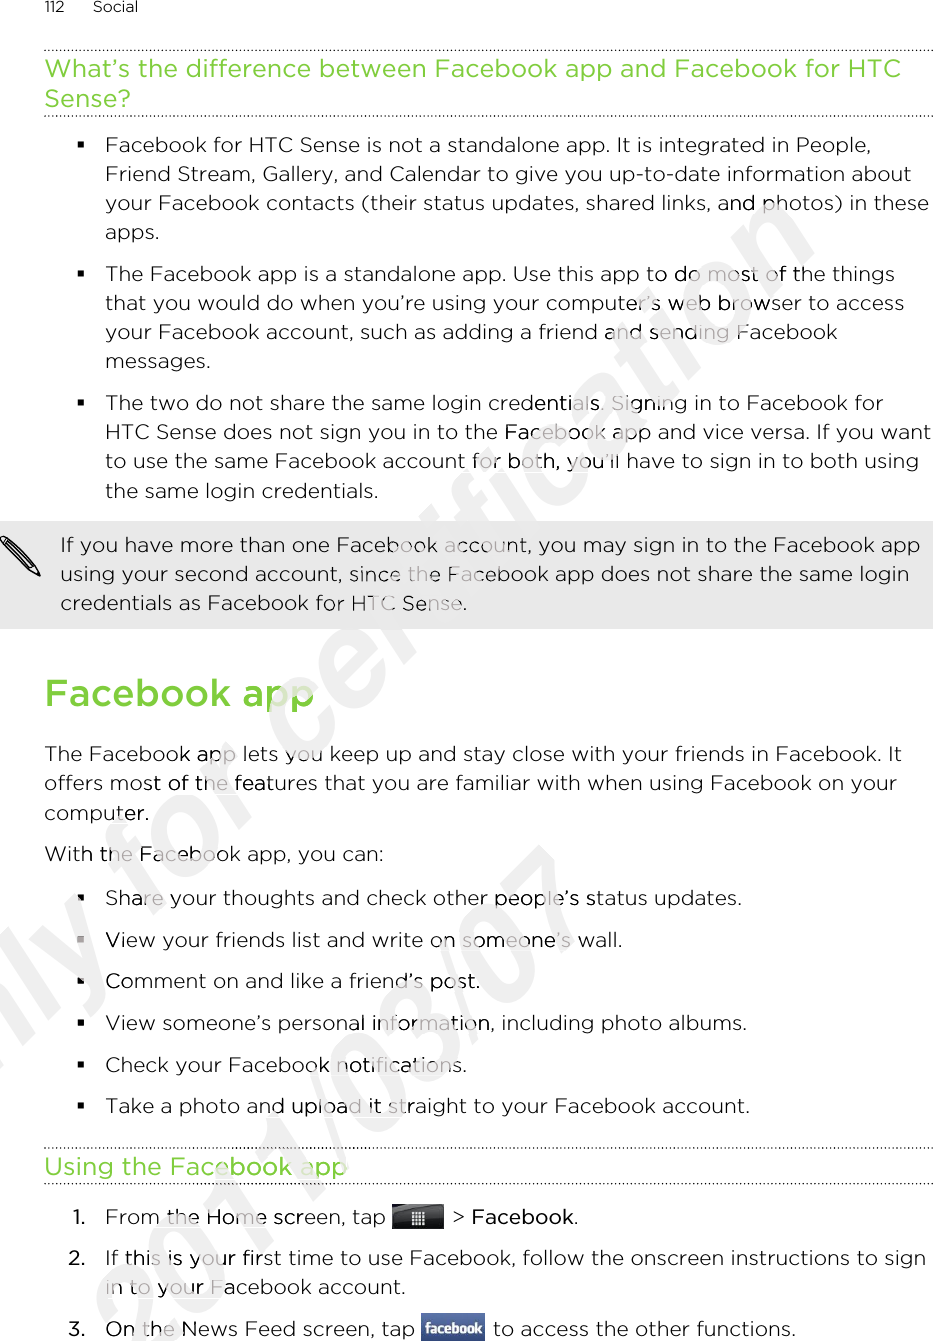 What’s the difference between Facebook app and Facebook for HTCSense?§Facebook for HTC Sense is not a standalone app. It is integrated in People,Friend Stream, Gallery, and Calendar to give you up-to-date information aboutyour Facebook contacts (their status updates, shared links, and photos) in theseapps.§The Facebook app is a standalone app. Use this app to do most of the thingsthat you would do when you’re using your computer’s web browser to accessyour Facebook account, such as adding a friend and sending Facebookmessages.§The two do not share the same login credentials. Signing in to Facebook forHTC Sense does not sign you in to the Facebook app and vice versa. If you wantto use the same Facebook account for both, you’ll have to sign in to both usingthe same login credentials.If you have more than one Facebook account, you may sign in to the Facebook appusing your second account, since the Facebook app does not share the same logincredentials as Facebook for HTC Sense.Facebook appThe Facebook app lets you keep up and stay close with your friends in Facebook. Itoffers most of the features that you are familiar with when using Facebook on yourcomputer.With the Facebook app, you can:§Share your thoughts and check other people’s status updates.§View your friends list and write on someone’s wall.§Comment on and like a friend’s post.§View someone’s personal information, including photo albums.§Check your Facebook notifications.§Take a photo and upload it straight to your Facebook account.Using the Facebook app1. From the Home screen, tap   &gt; Facebook.2. If this is your first time to use Facebook, follow the onscreen instructions to signin to your Facebook account.3. On the News Feed screen, tap   to access the other functions.112 SocialOnly §Only §§Only §View your friends list and write on someone’s wall.Only View your friends list and write on someone’s wall.§Only §Comment on and like a friend’s post.Only Comment on and like a friend’s post.§Only §for The Facebook app lets you keep up and stay close with your friends in Facebook. Itfor The Facebook app lets you keep up and stay close with your friends in Facebook. Itoffers most of the features that you are familiar with when using Facebook on yourfor offers most of the features that you are familiar with when using Facebook on yourcomputer.for computer.With the Facebook app, you can:for With the Facebook app, you can:Share your thoughts and check other people’s status updates.for Share your thoughts and check other people’s status updates.certification Friend Stream, Gallery, and Calendar to give you up-to-date information aboutcertification Friend Stream, Gallery, and Calendar to give you up-to-date information aboutyour Facebook contacts (their status updates, shared links, and photos) in thesecertification your Facebook contacts (their status updates, shared links, and photos) in theseThe Facebook app is a standalone app. Use this app to do most of the thingscertification The Facebook app is a standalone app. Use this app to do most of the thingsthat you would do when you’re using your computer’s web browser to accesscertification that you would do when you’re using your computer’s web browser to accessyour Facebook account, such as adding a friend and sending Facebookcertification your Facebook account, such as adding a friend and sending FacebookThe two do not share the same login credentials. Signing in to Facebook forcertification The two do not share the same login credentials. Signing in to Facebook forHTC Sense does not sign you in to the Facebook app and vice versa. If you wantcertification HTC Sense does not sign you in to the Facebook app and vice versa. If you wantto use the same Facebook account for both, you’ll have to sign in to both usingcertification to use the same Facebook account for both, you’ll have to sign in to both usingcertification If you have more than one Facebook account, you may sign in to the Facebook appcertification If you have more than one Facebook account, you may sign in to the Facebook appusing your second account, since the Facebook app does not share the same logincertification using your second account, since the Facebook app does not share the same logincredentials as Facebook for HTC Sense.certification credentials as Facebook for HTC Sense.Facebook appcertification Facebook appThe Facebook app lets you keep up and stay close with your friends in Facebook. Itcertification The Facebook app lets you keep up and stay close with your friends in Facebook. It2011/03/07Share your thoughts and check other people’s status updates.2011/03/07Share your thoughts and check other people’s status updates.View your friends list and write on someone’s wall.2011/03/07View your friends list and write on someone’s wall.Comment on and like a friend’s post.2011/03/07Comment on and like a friend’s post.View someone’s personal information, including photo albums.2011/03/07View someone’s personal information, including photo albums.Check your Facebook notifications.2011/03/07Check your Facebook notifications.Take a photo and upload it straight to your Facebook account.2011/03/07Take a photo and upload it straight to your Facebook account.Using the Facebook app2011/03/07Using the Facebook app2011/03/072011/03/072011/03/07From the Home screen, tap 2011/03/07From the Home screen, tap If this is your first time to use Facebook, follow the onscreen instructions to sign2011/03/07If this is your first time to use Facebook, follow the onscreen instructions to signin to your Facebook account.2011/03/07in to your Facebook account.On the News Feed screen, tap 2011/03/07On the News Feed screen, tap 